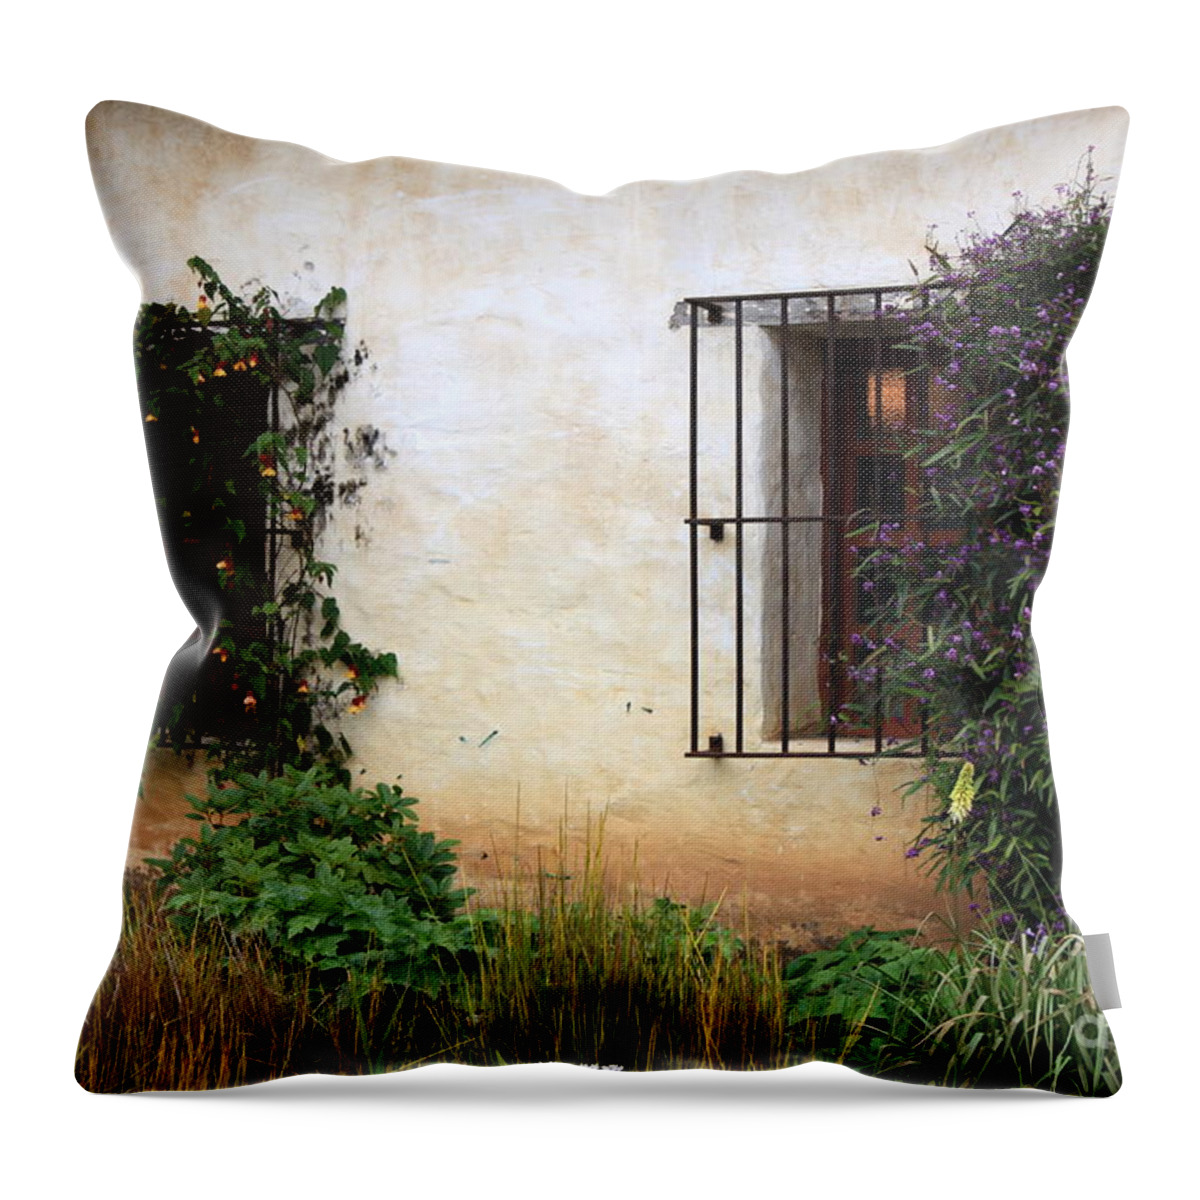 Vines Throw Pillow featuring the photograph Mission Windows by Carol Groenen